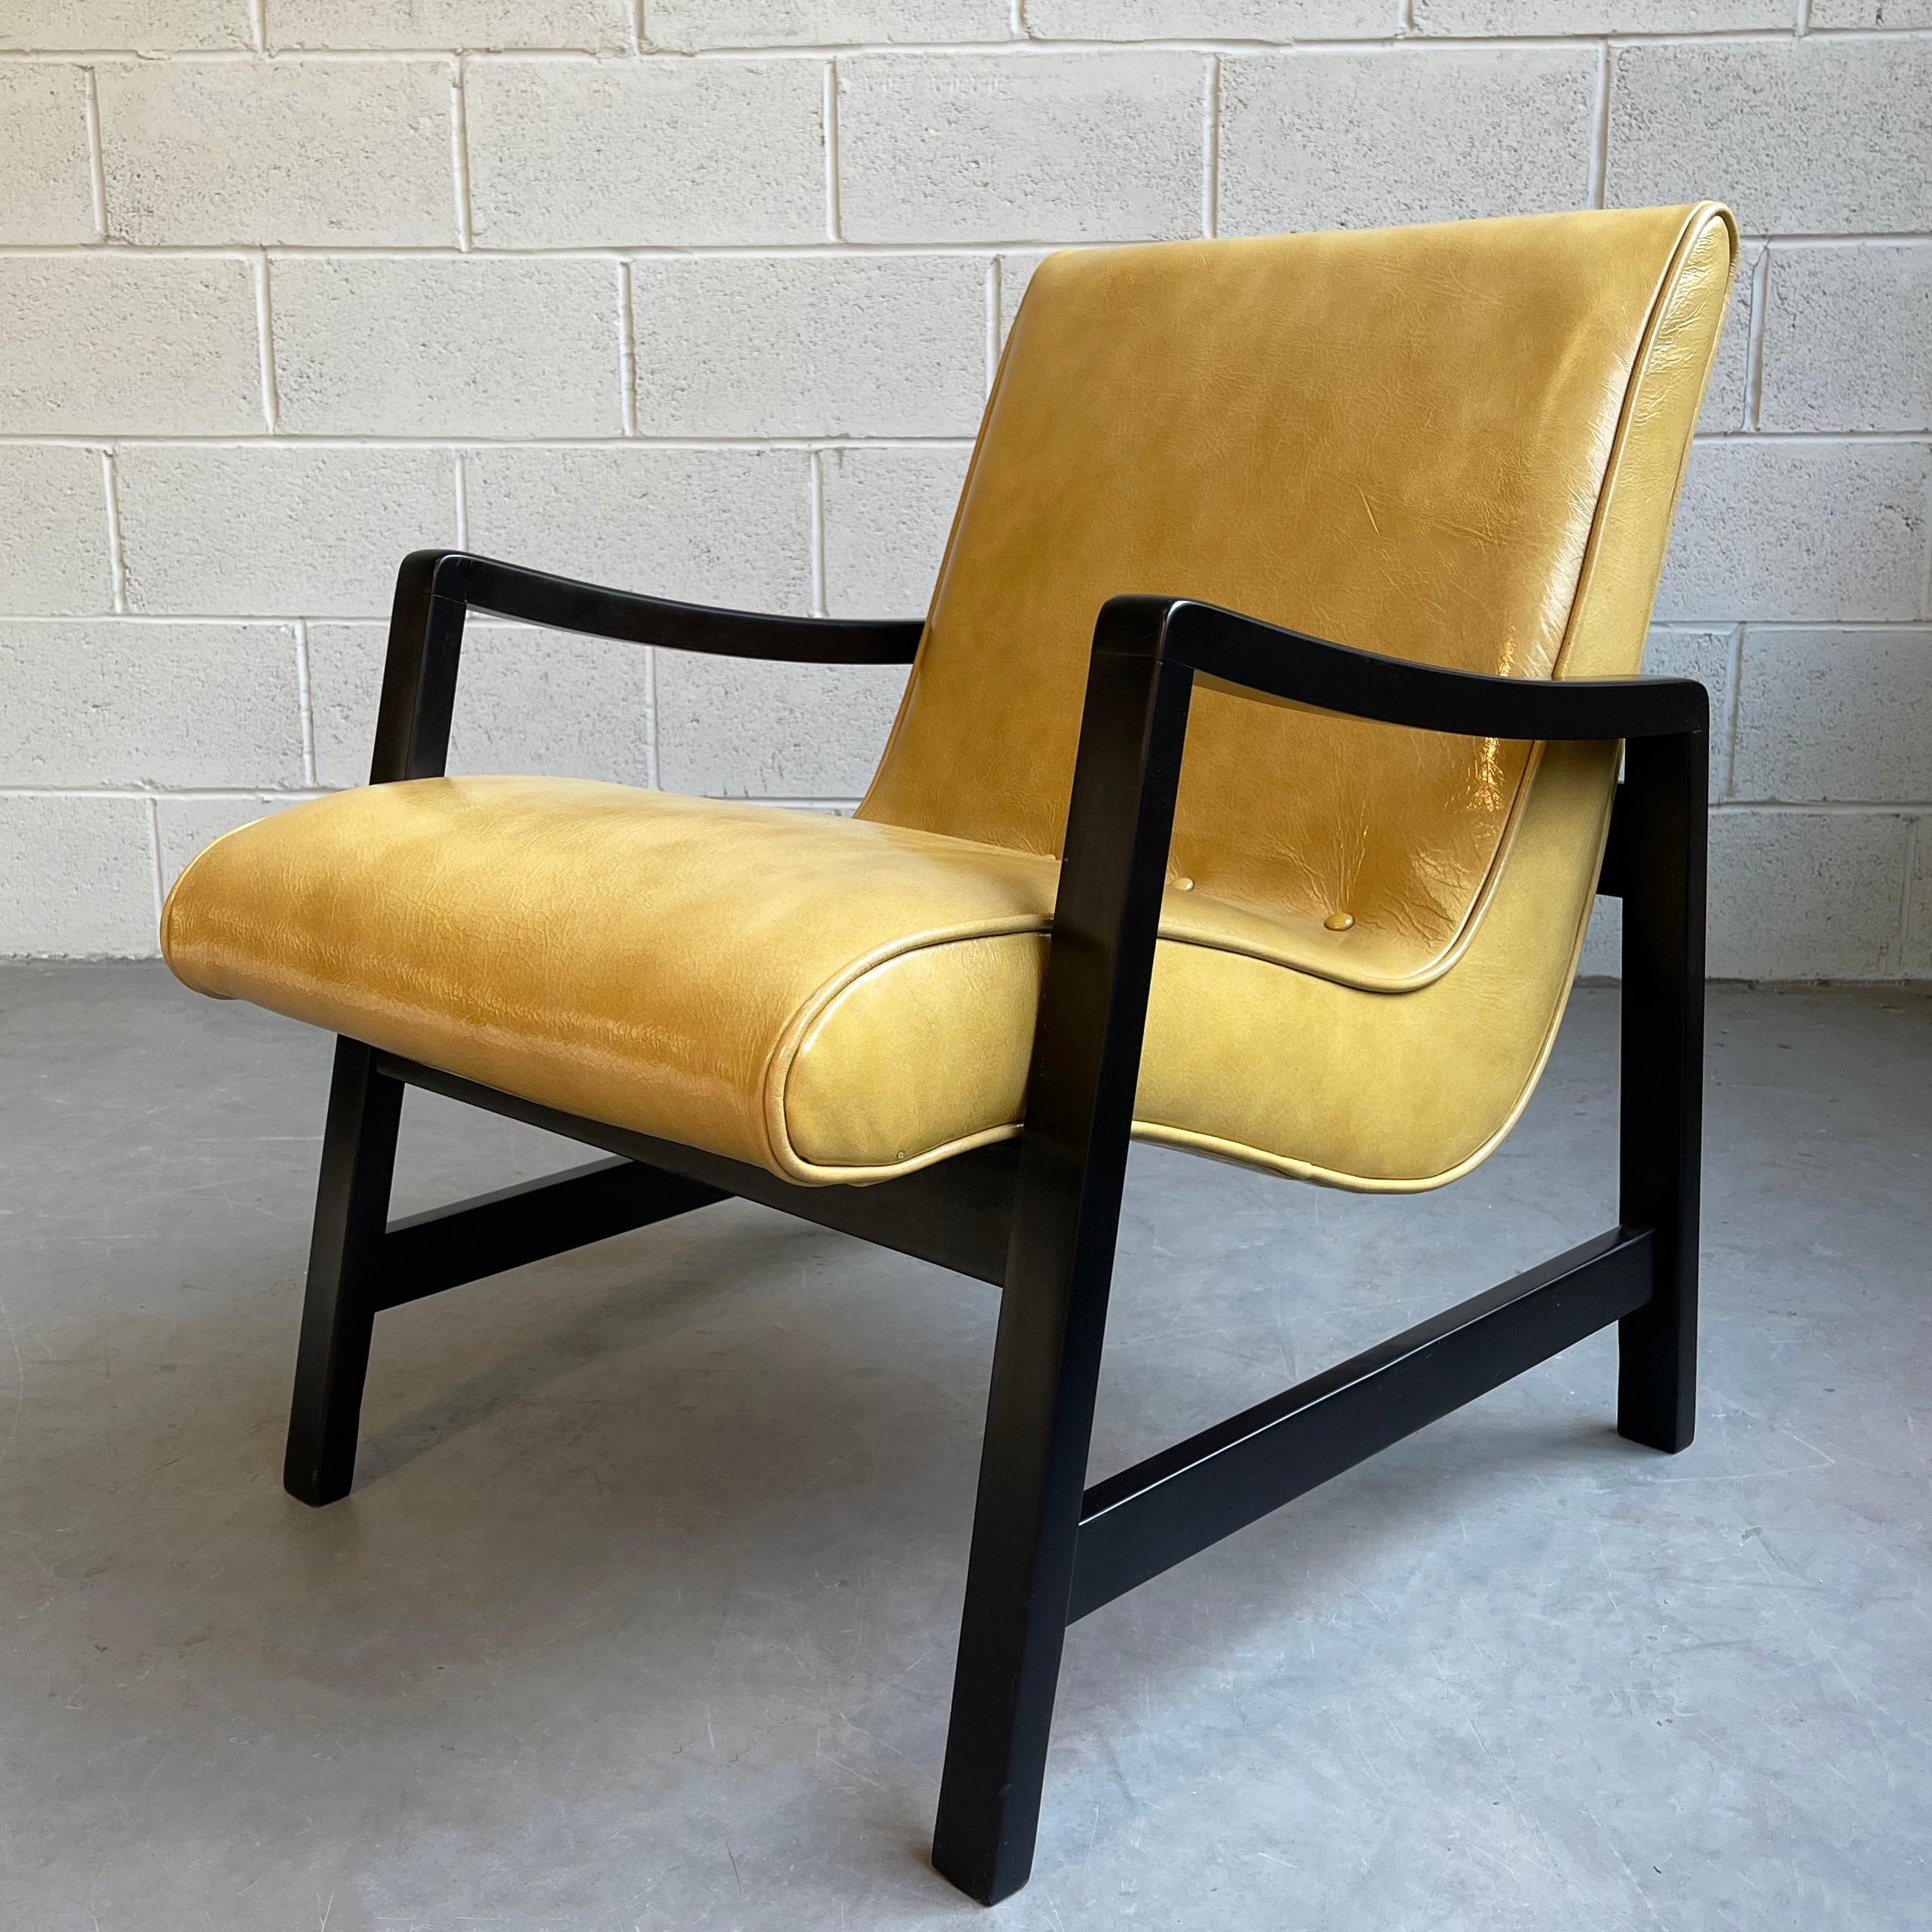 Mid-Century Modern, scoop, lounge chair by Jens Risom for Knoll features a minimal, black lacquered maple frame with a floating scoop seat newly upholstered in mustard yellow, textured leather.